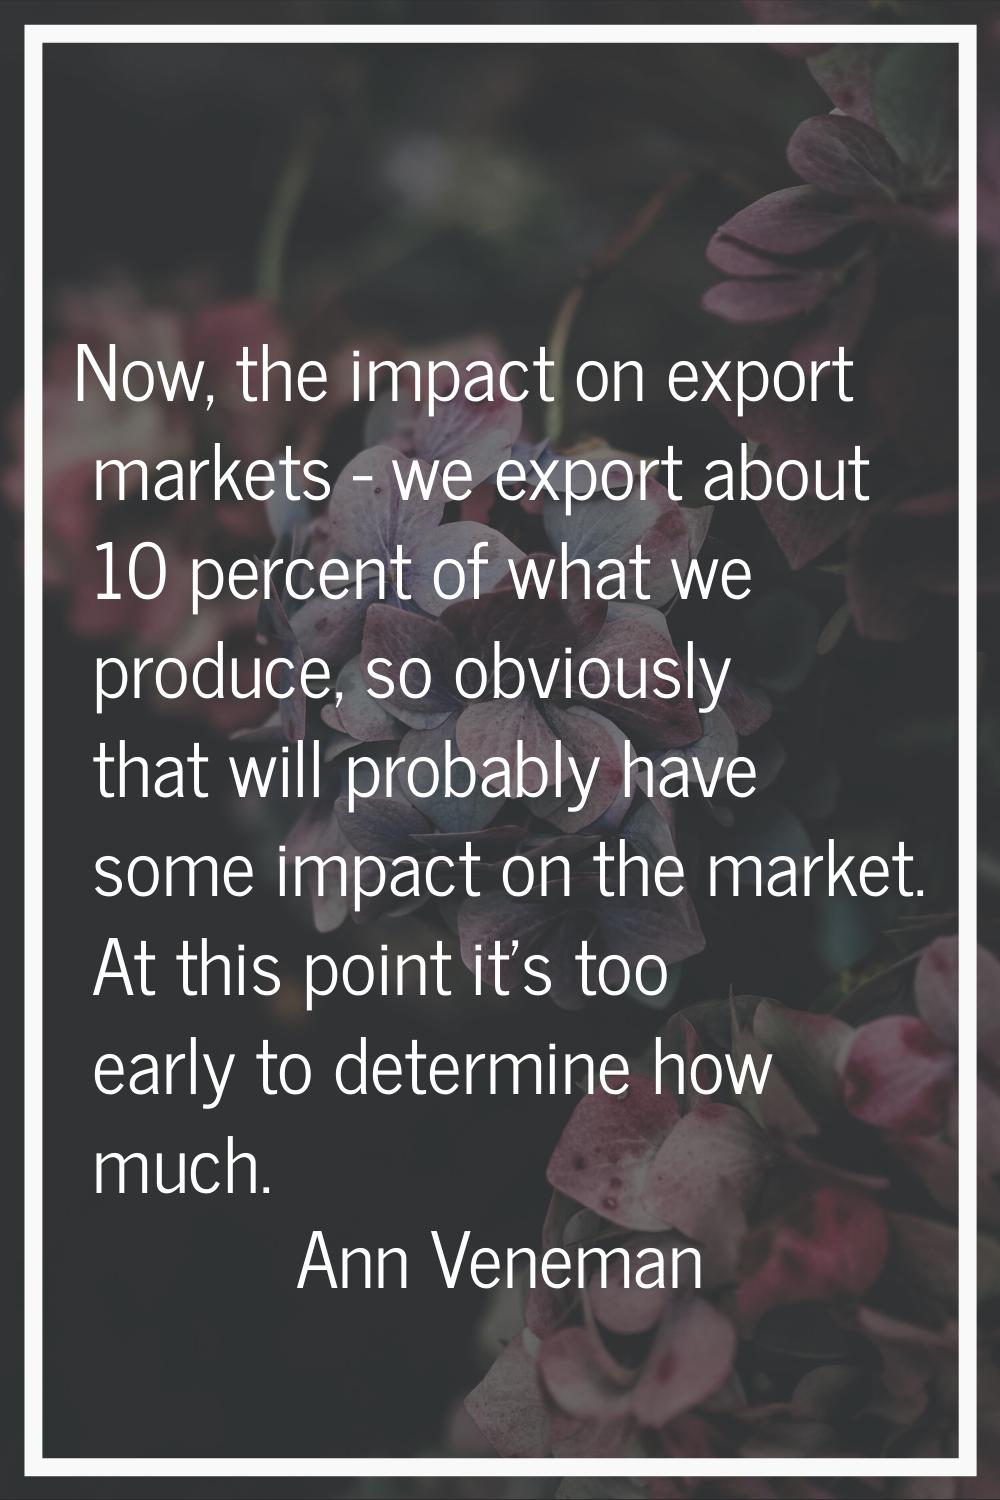 Now, the impact on export markets - we export about 10 percent of what we produce, so obviously tha